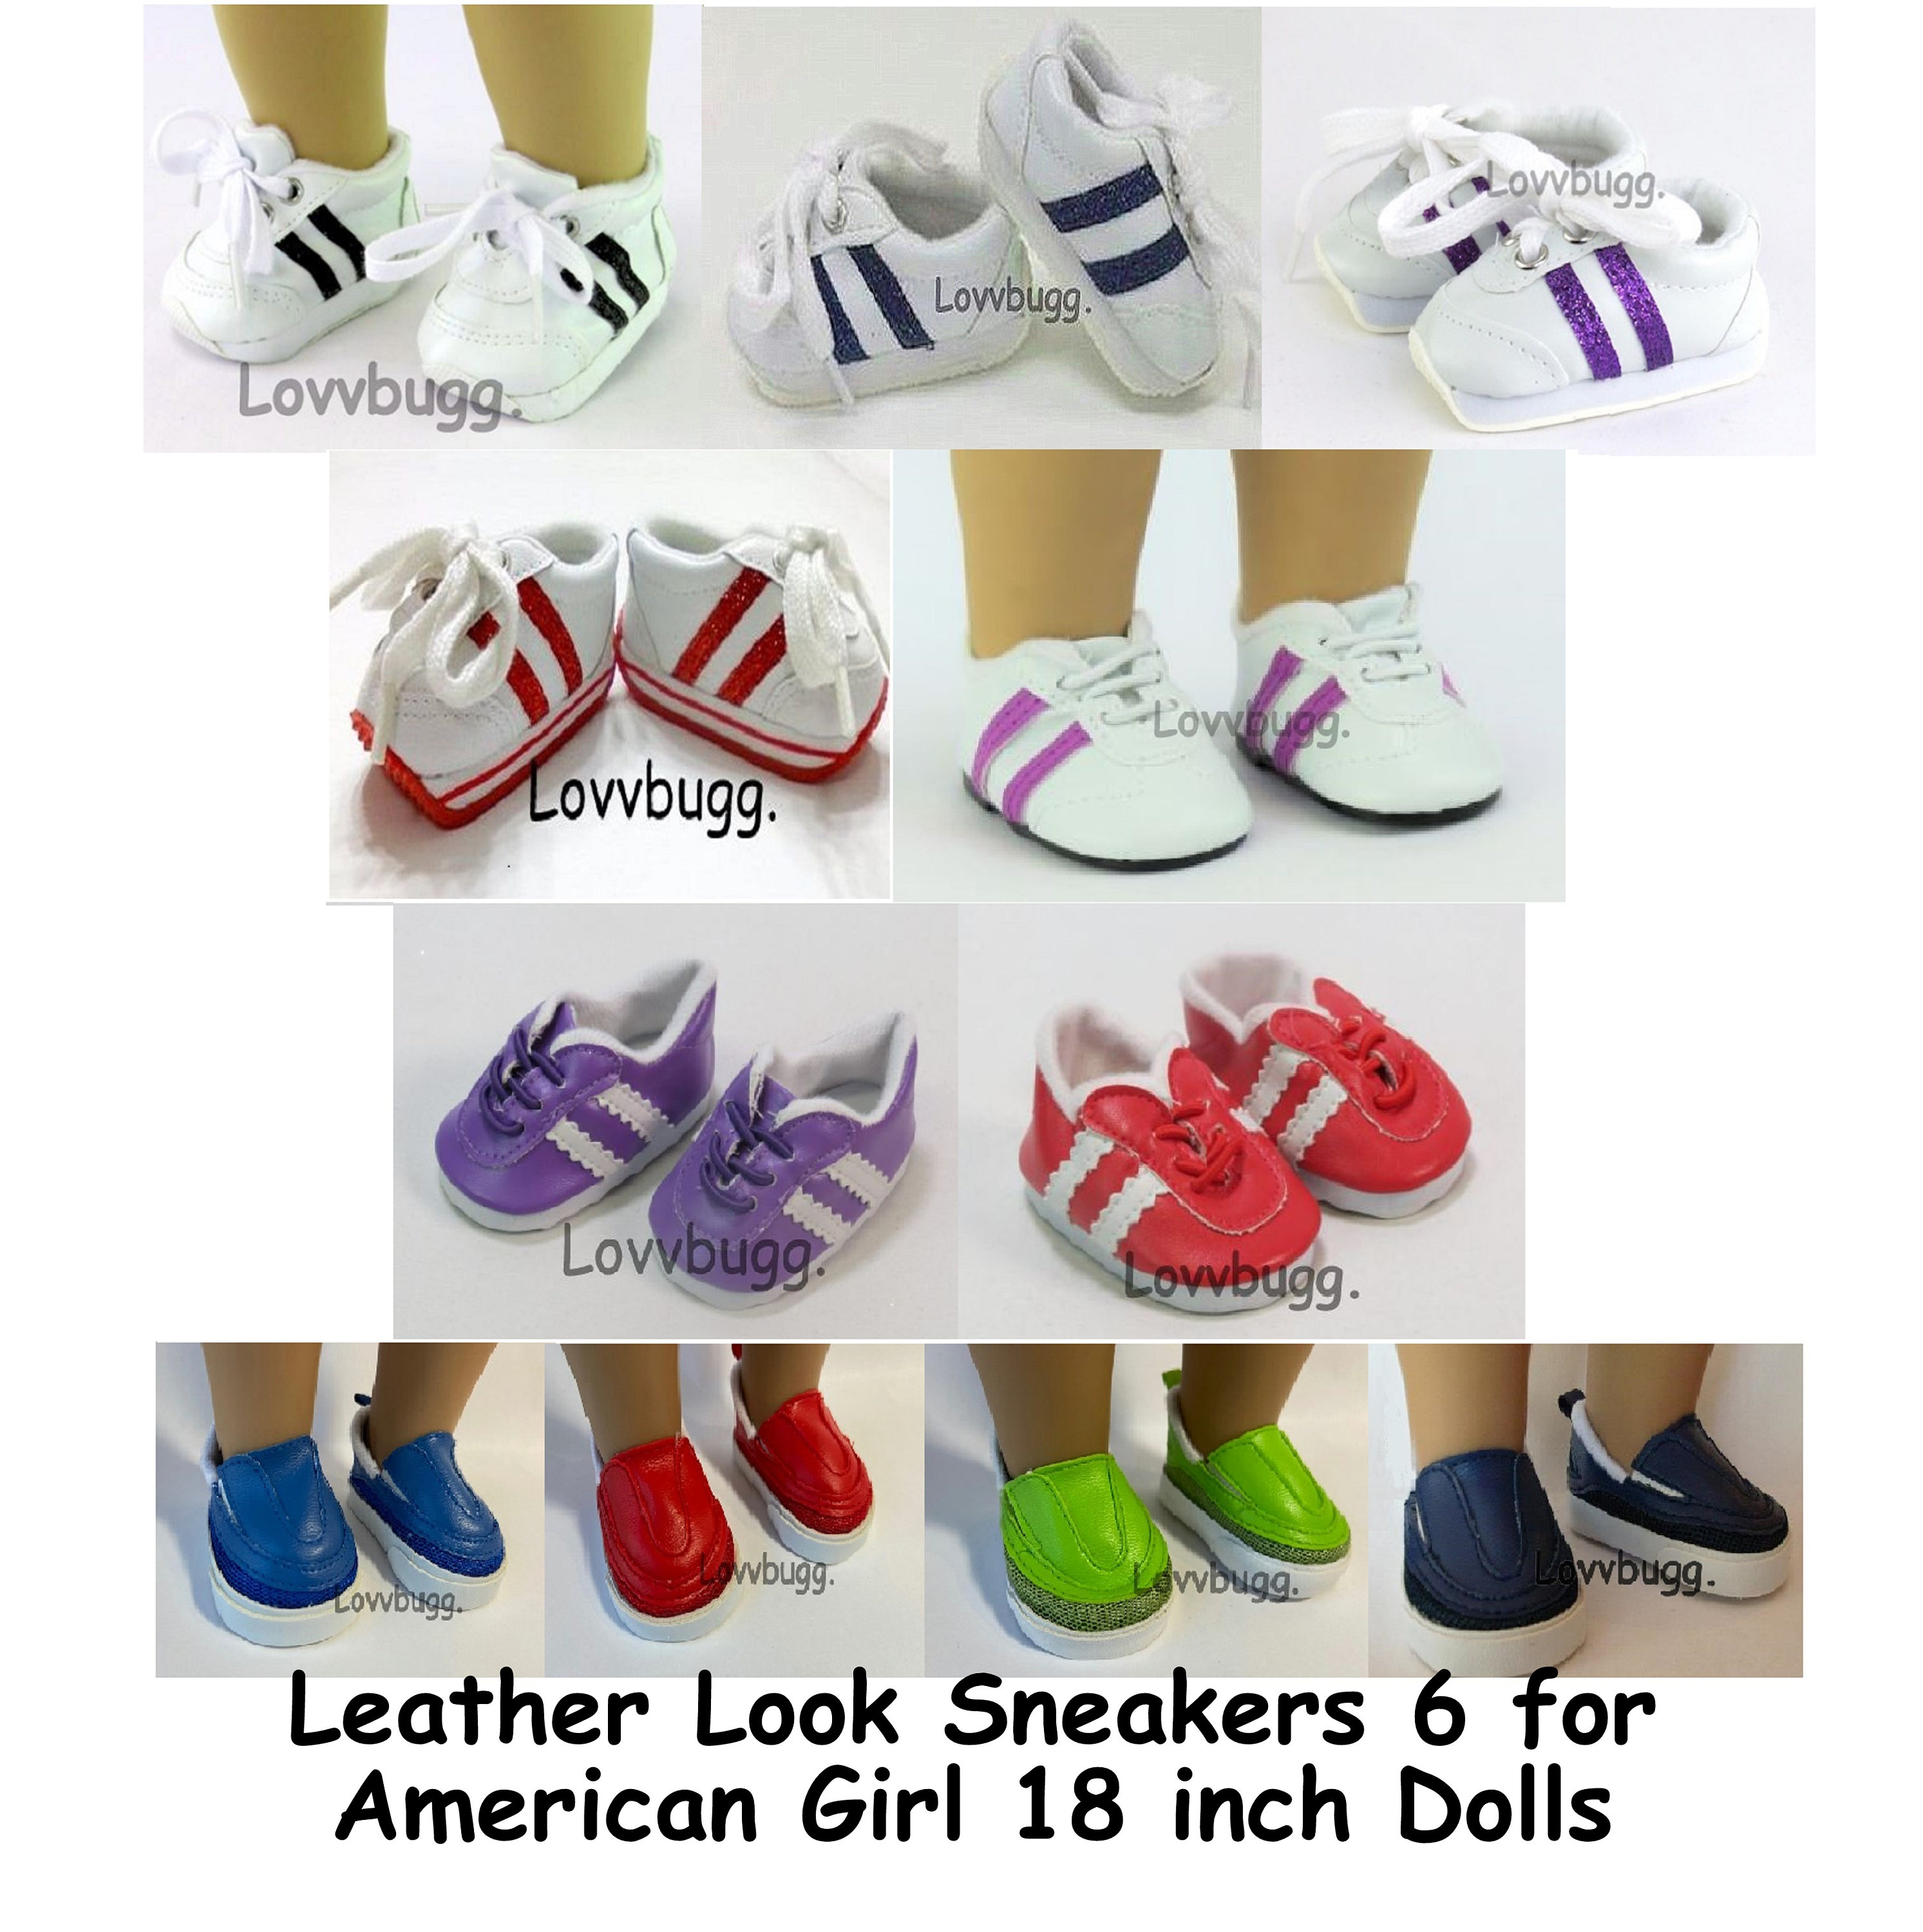 Sophia's Sophia S Doll Sequin Tennis Sneaker With Laces And Imitation  Leather Toe Cap Shoes For 18 Dolls, Silver